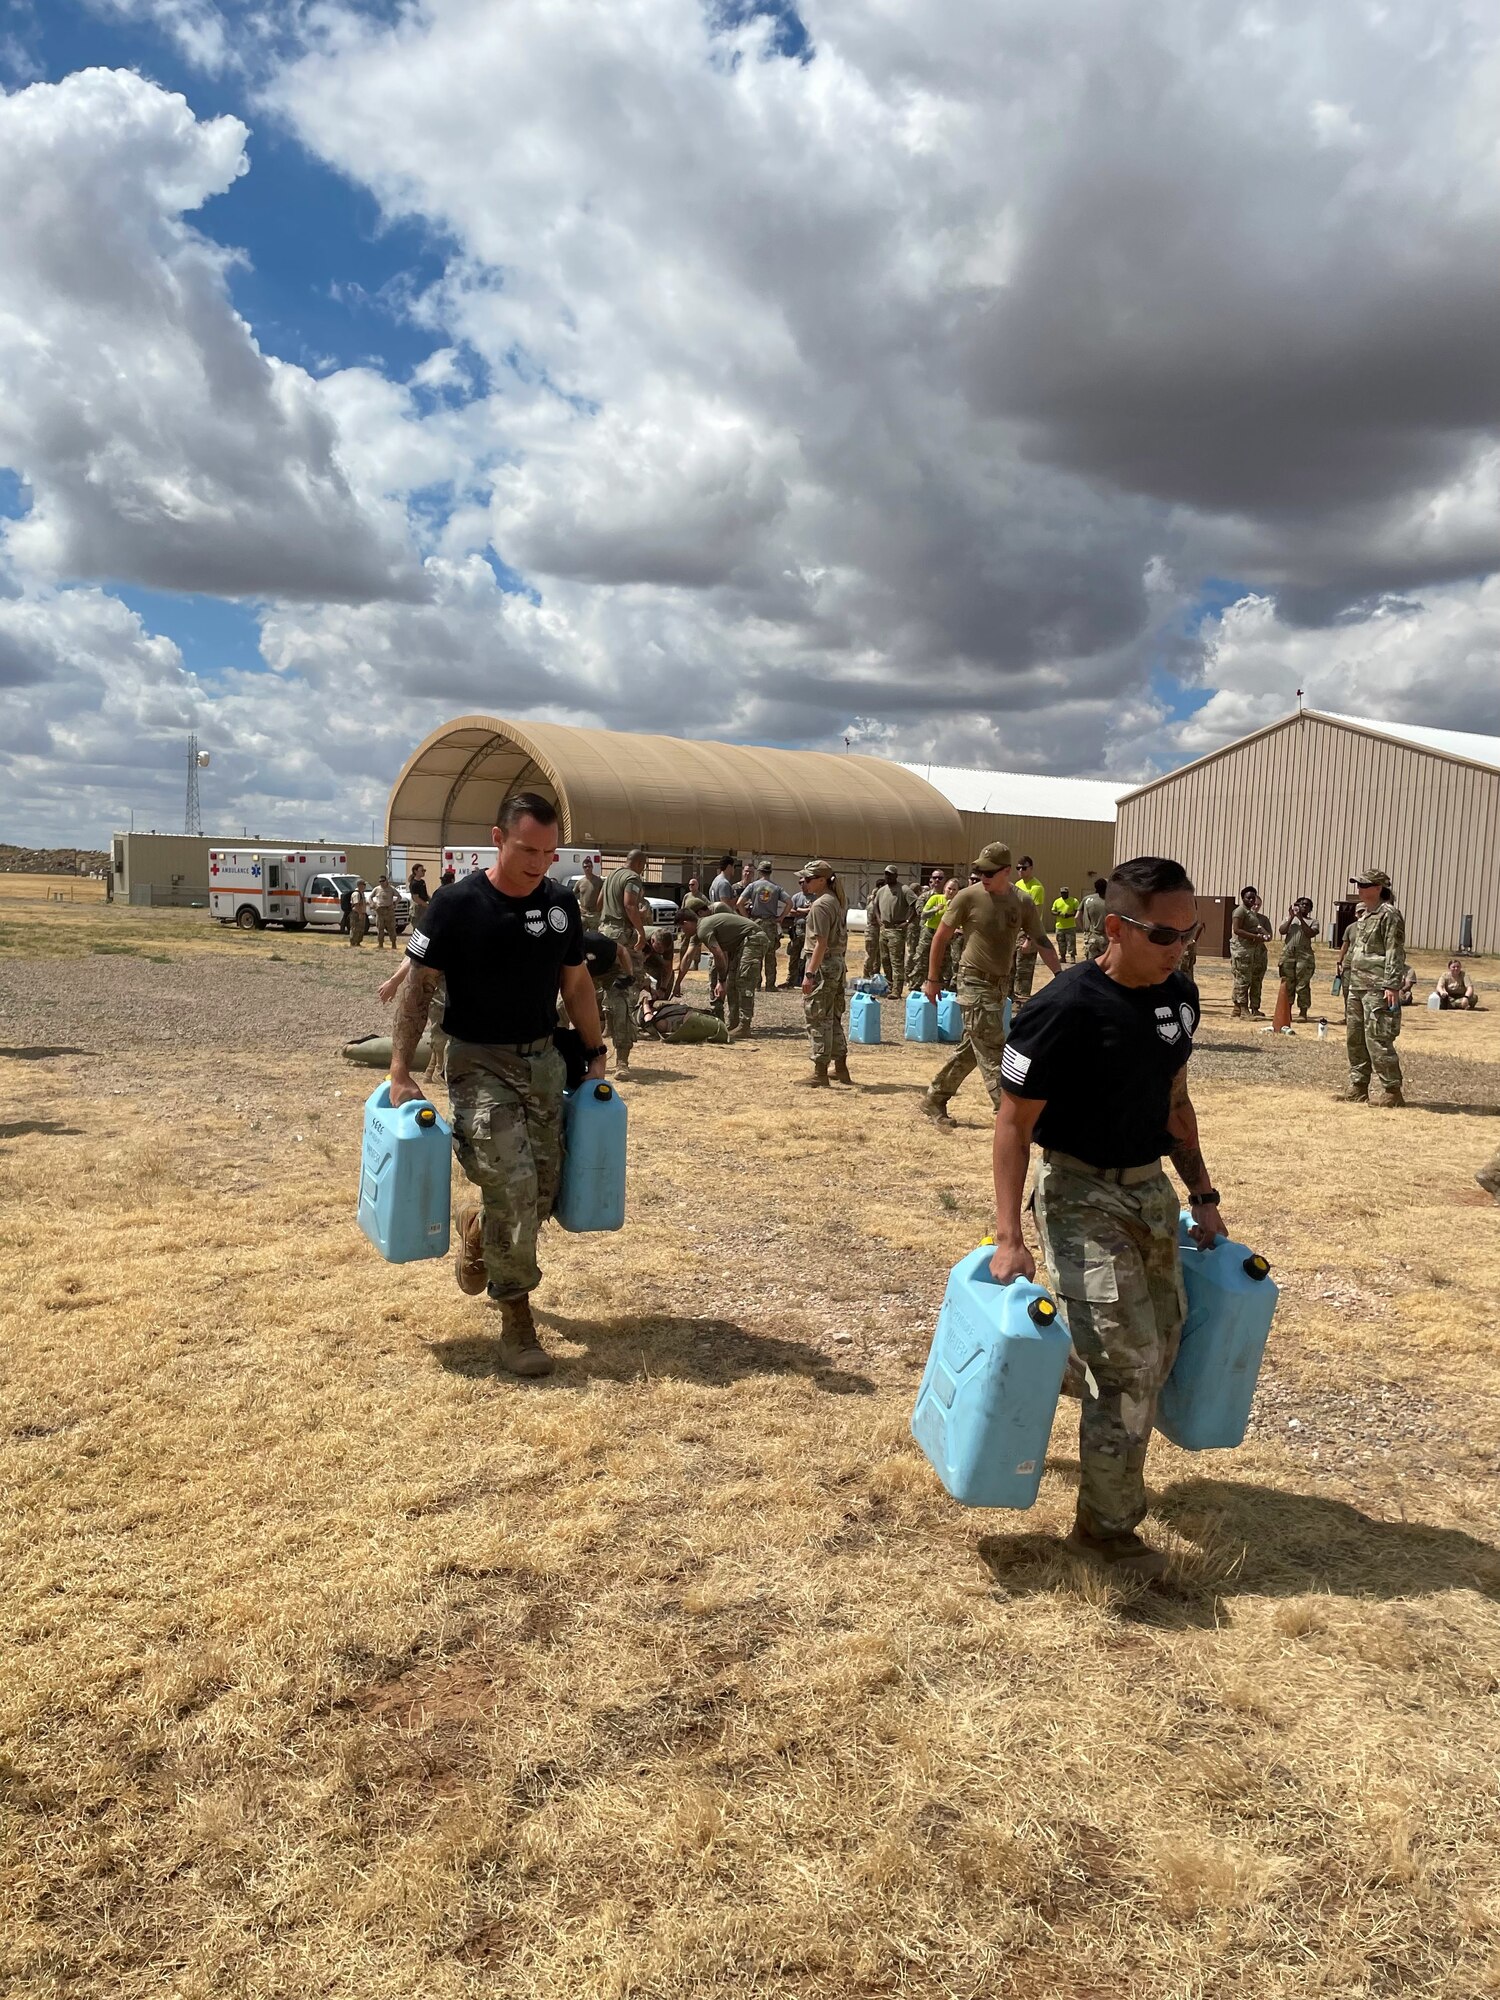 Medics running holding two jugs of water